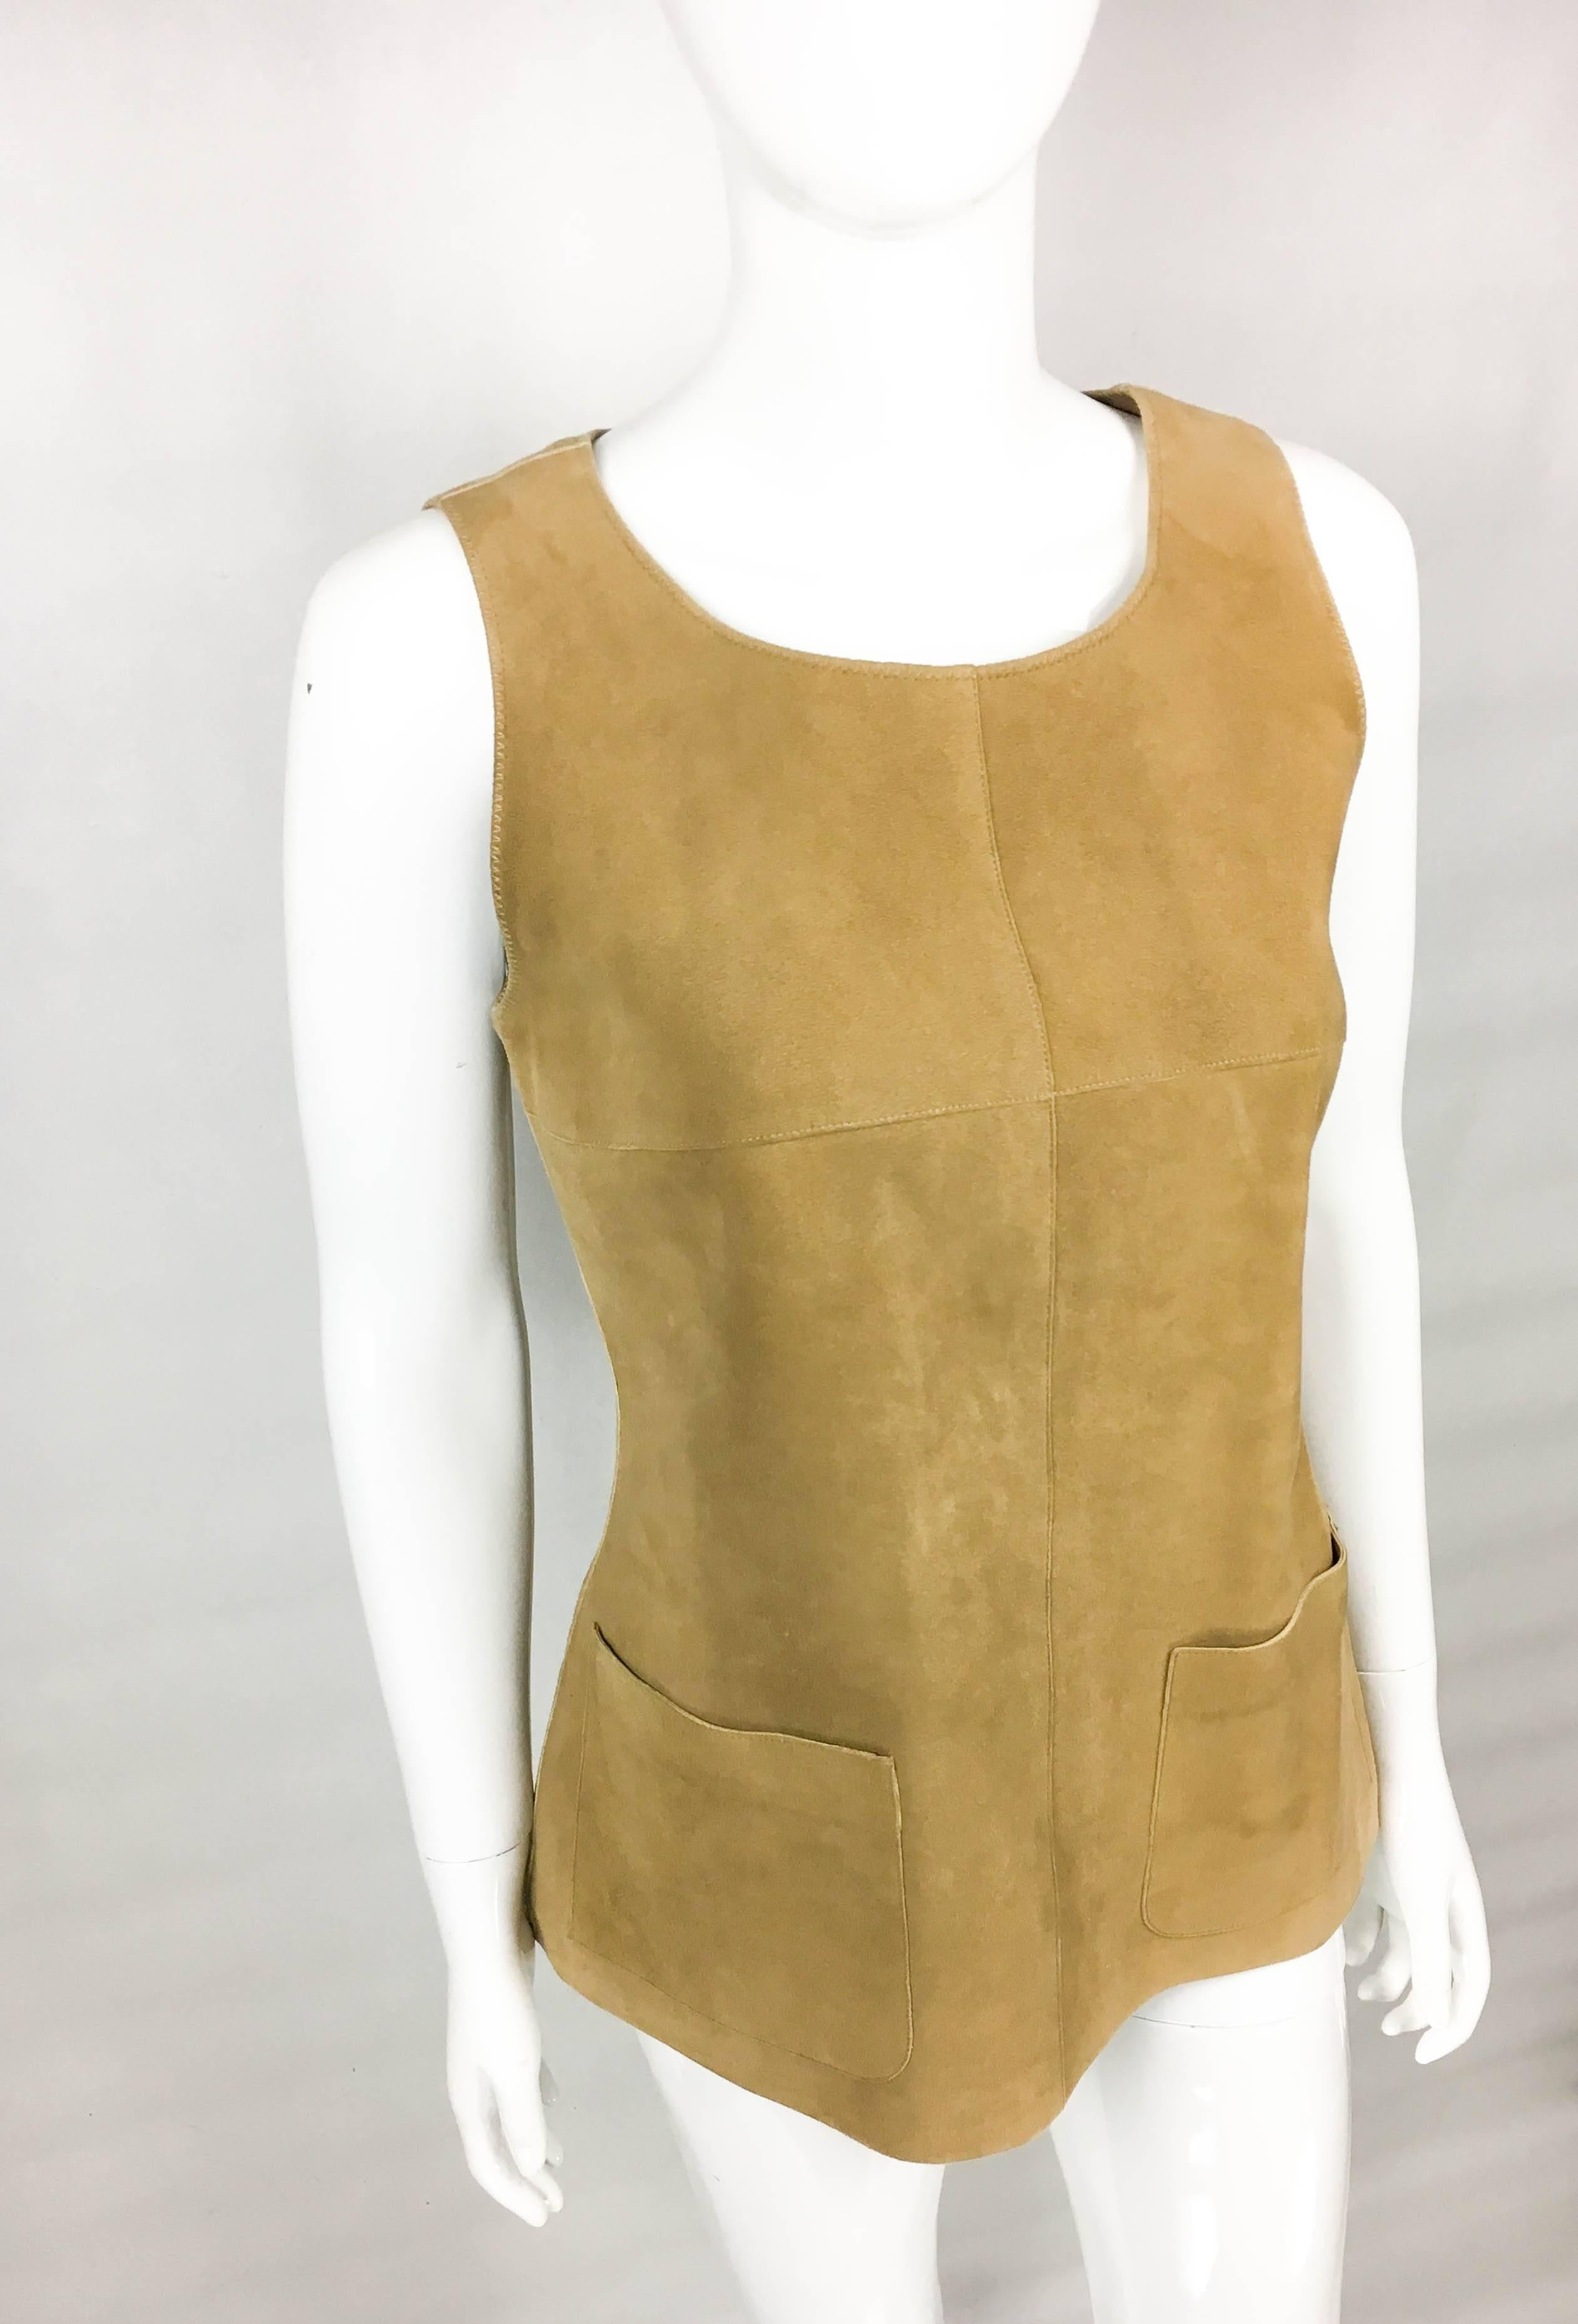 Women's Chanel Tan Suede Gilet, 1999  For Sale